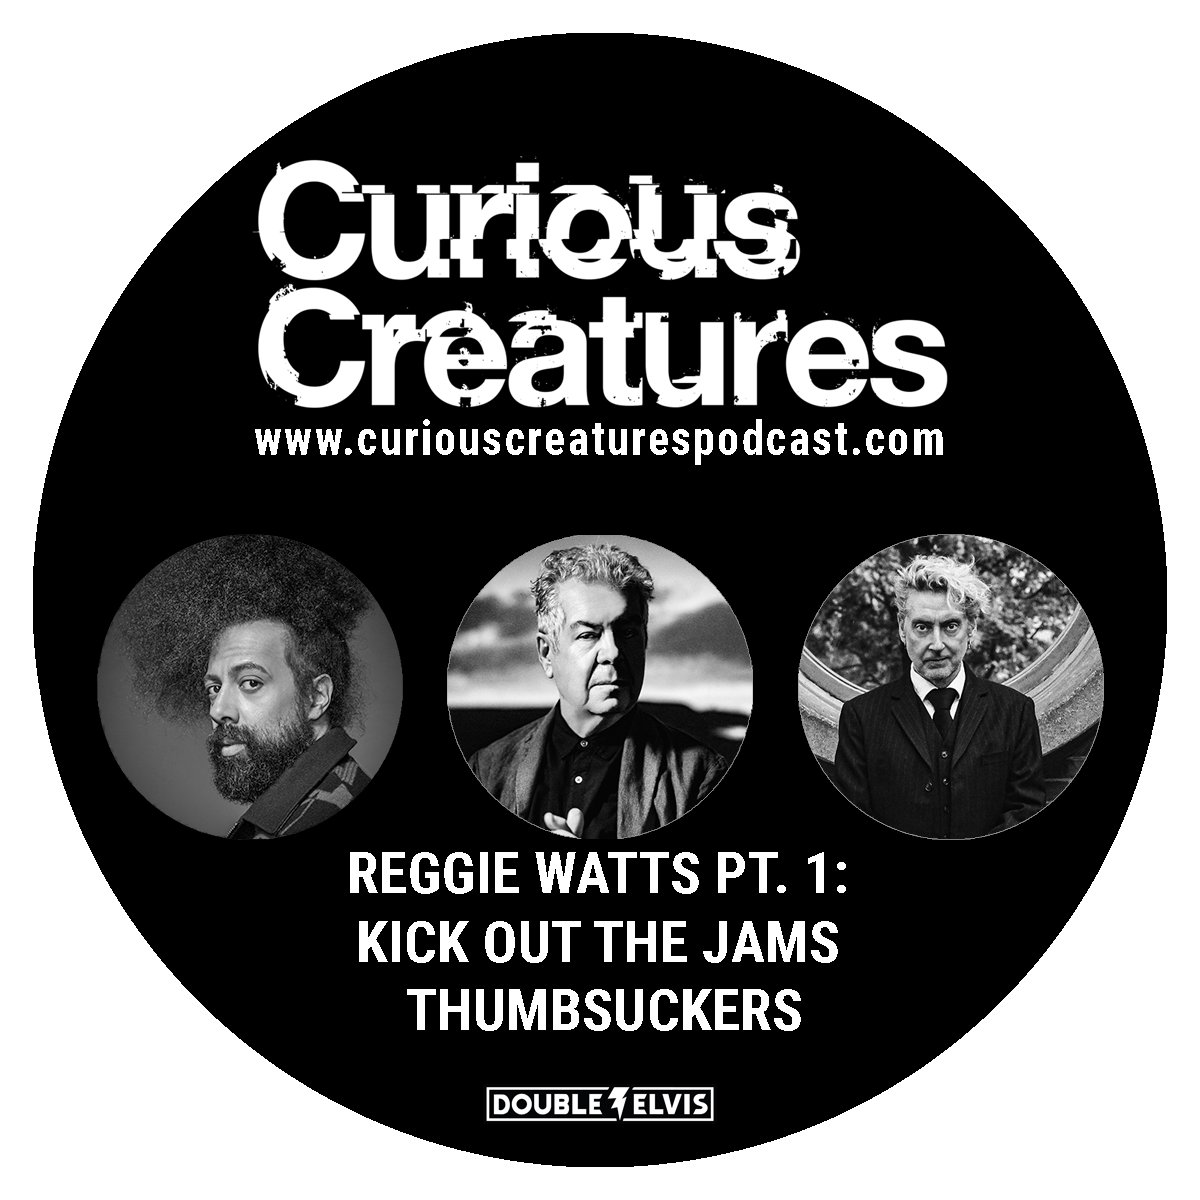 On this week's @curecreatures we're chatting to comedian/musican/author Reggie Watts about his new book Great Falls, MT, growing up in the 80's, the darkness and much more. Find - Reggie Watts Pt. 1: Kick Out The Jams Thumbsuckers - wherever you get your podcasts.